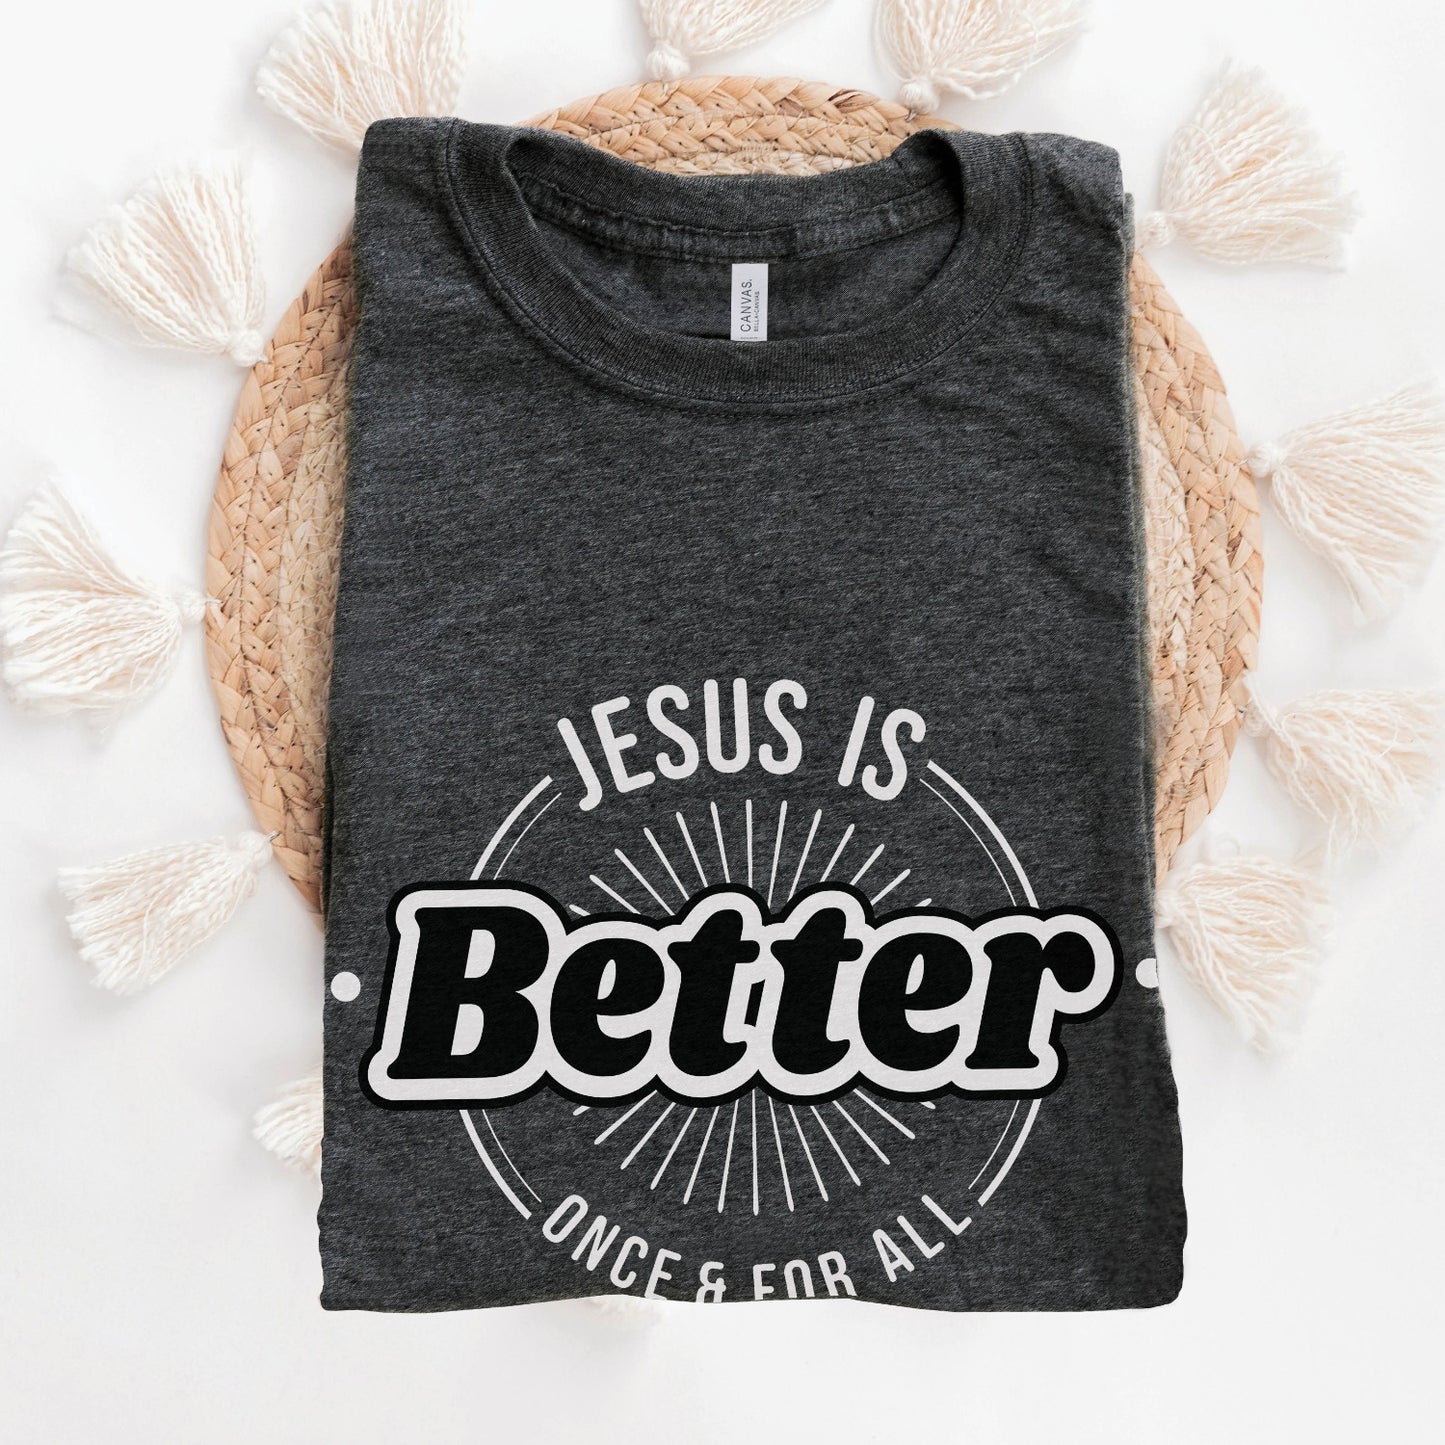 Folded Heather Dark Gray "Jesus Is Better - Once & For All" bible book of Hebrews faith-based Christian unisex t-shirt for women with a bold white and black sunburst logo style design